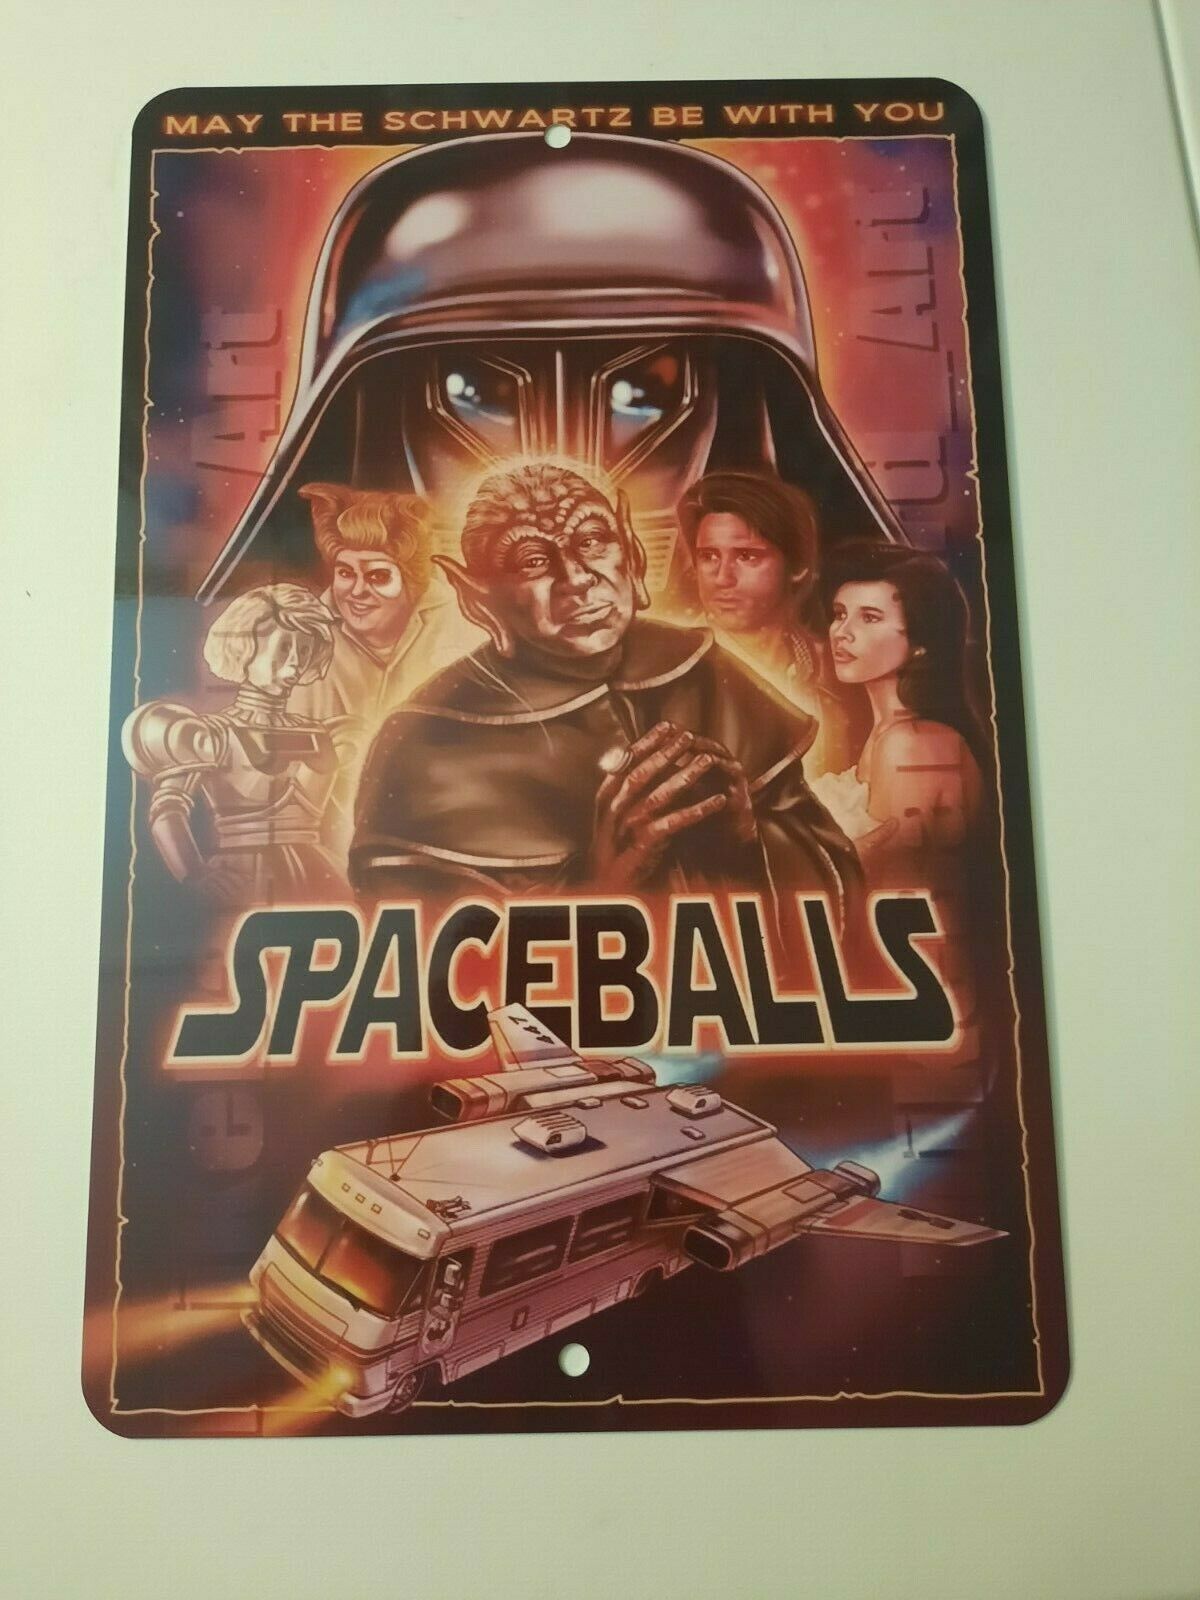 SPACEBALLS Comedy Movie Poster Art 8x12 Metal Wall Sign